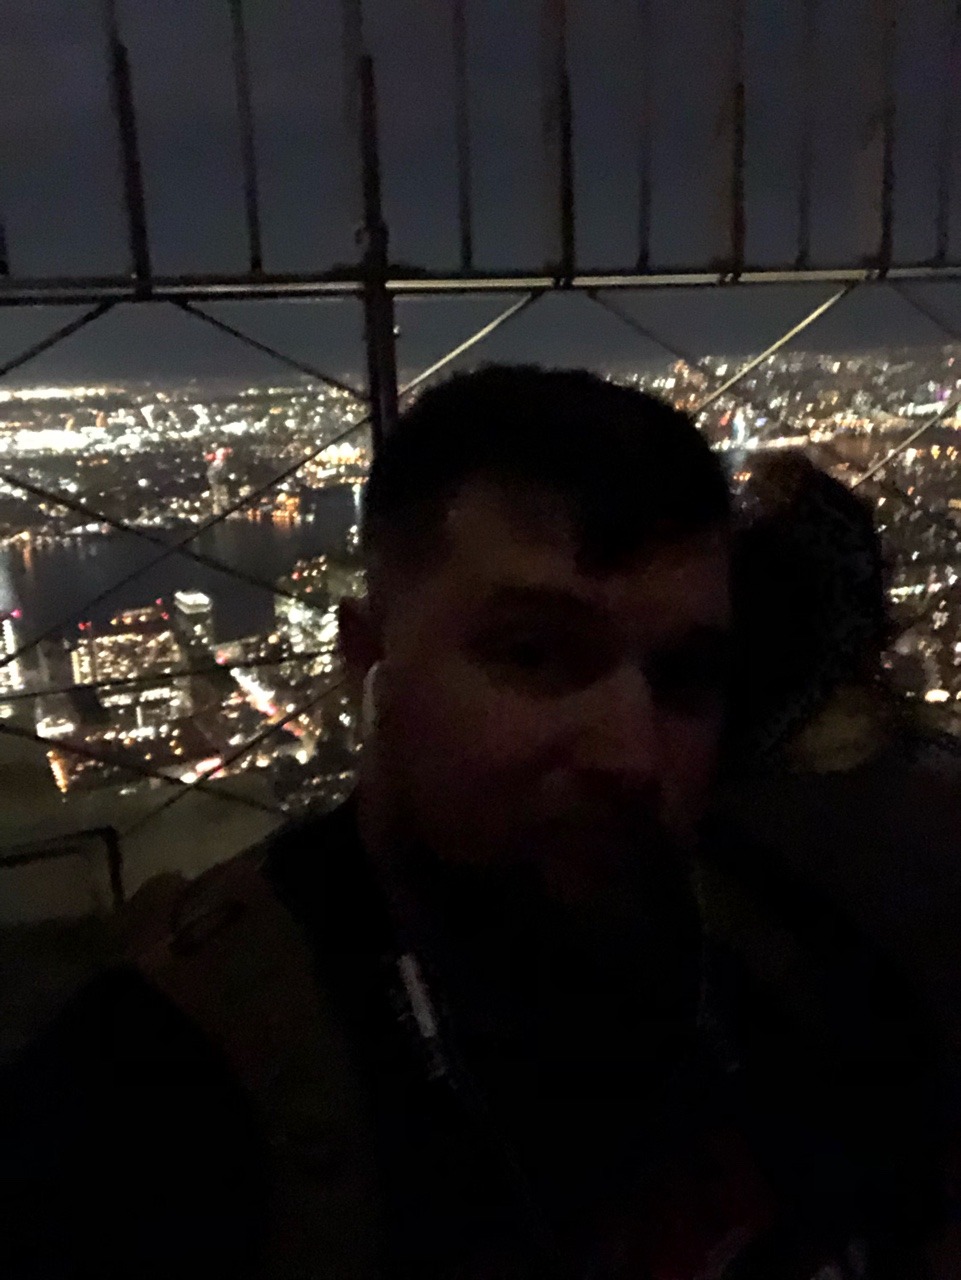 Empire State Building at night is a nice view and the breeze felt amazing haha